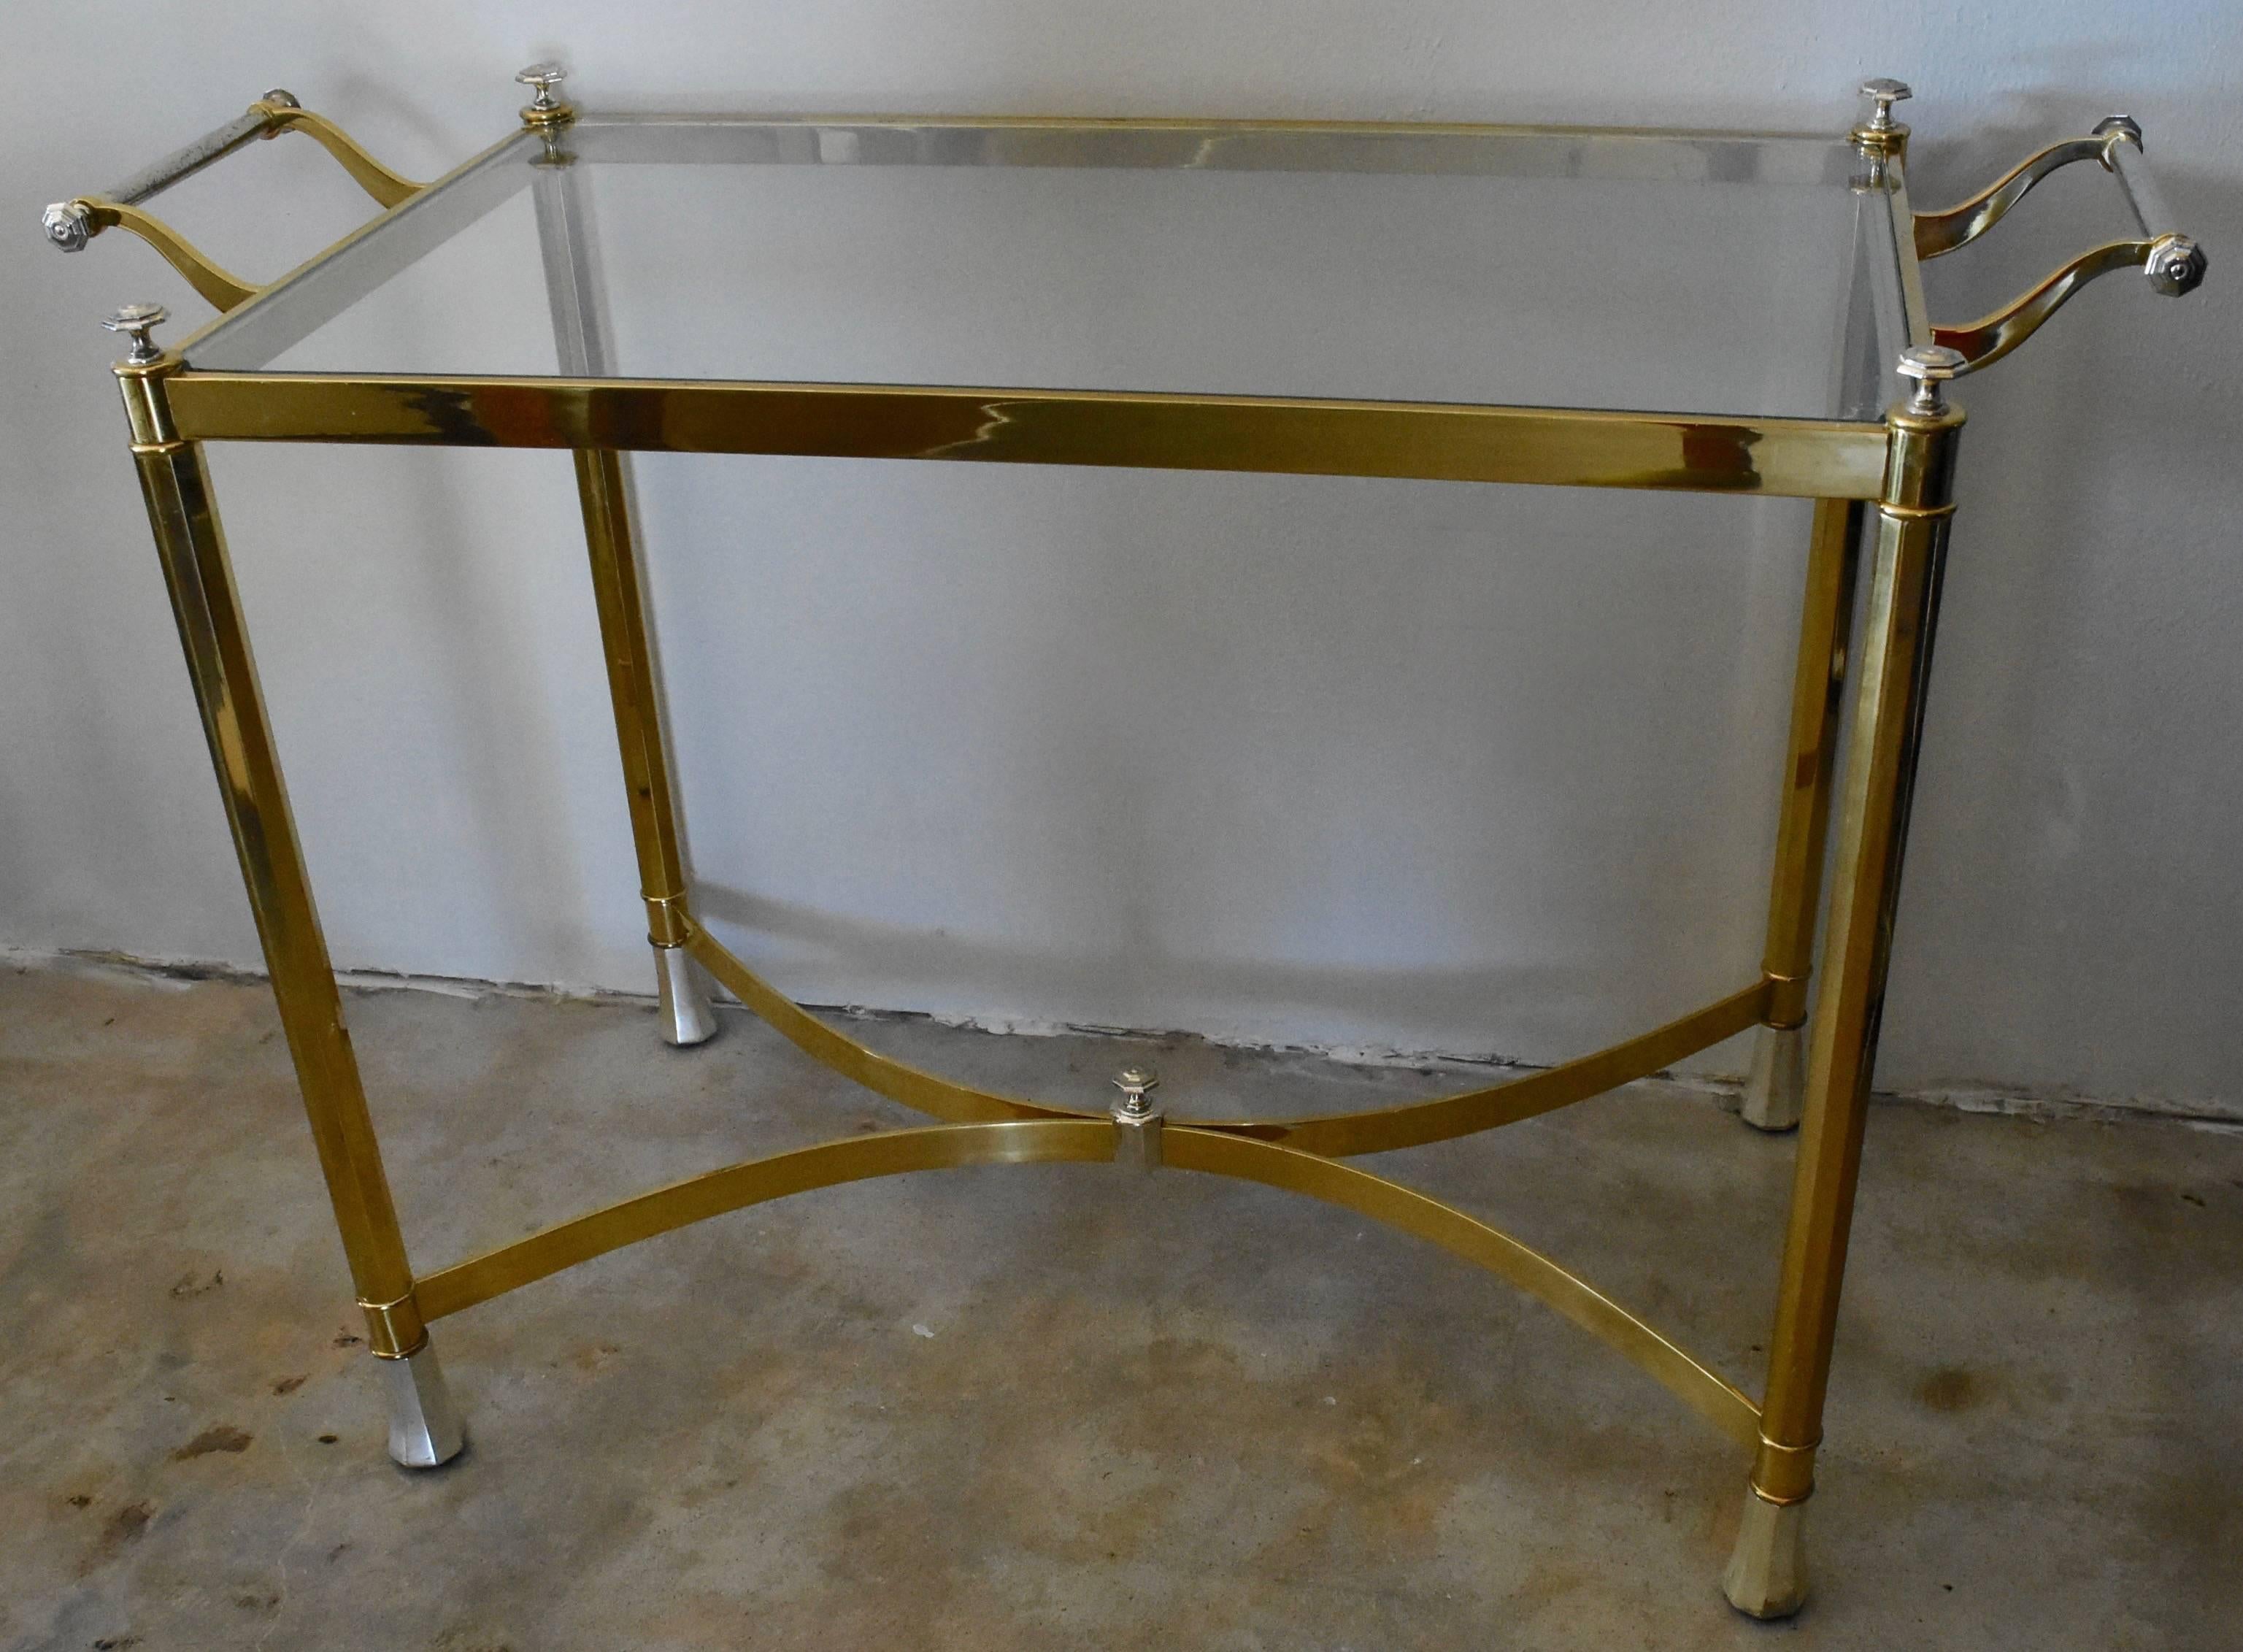 This is a adorable vintage 1970s Italian table that is great as a side table or fixed bar cart. It's brass and silver plated with a removable glass center top.